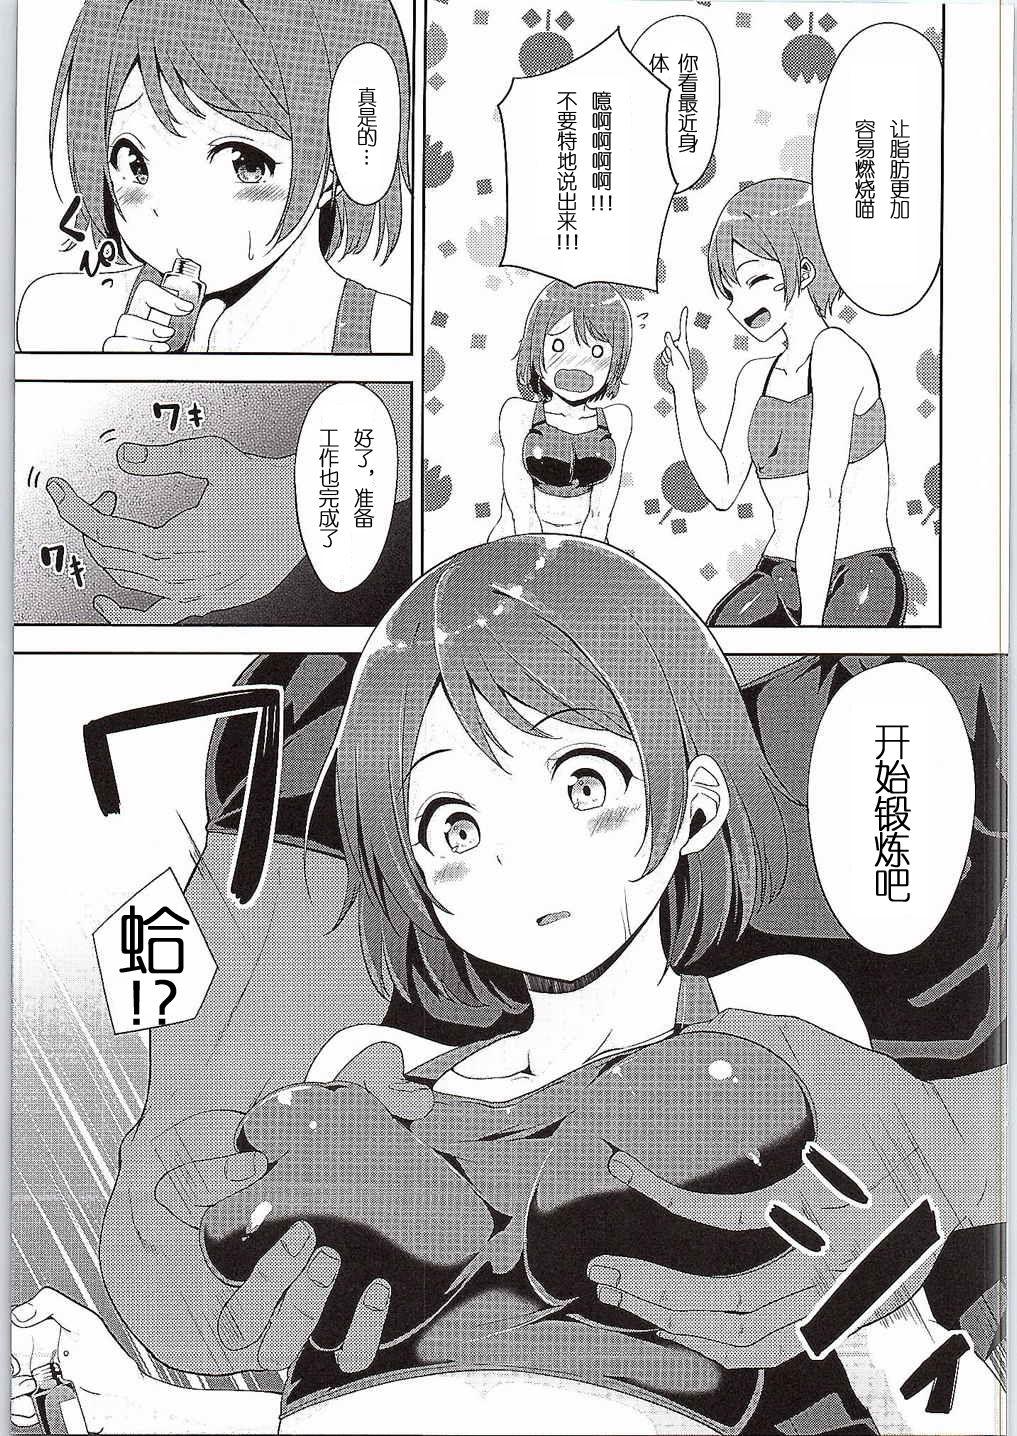 Friends LOVE FITTING ROOM - Love live Toy - Page 6